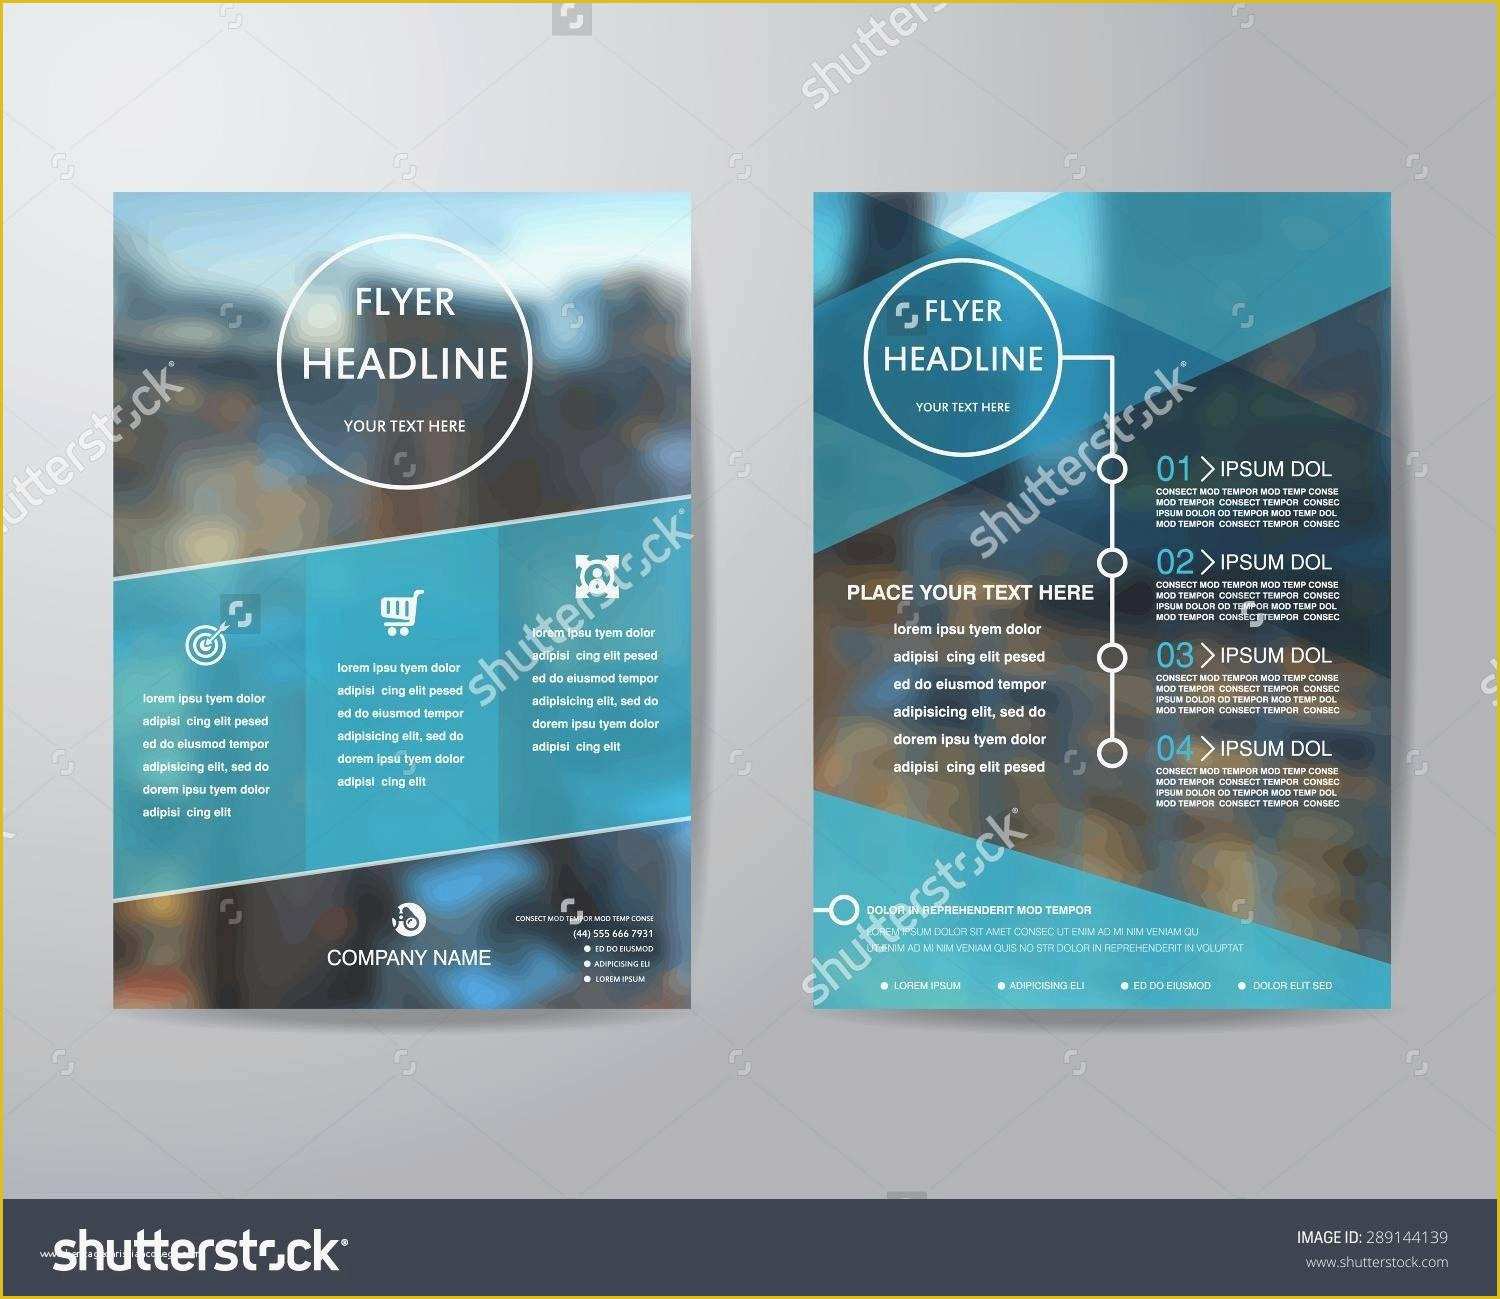 Modern Powerpoint Templates Free Download Of Ppt Brochure Templates Free New Best Ppt Background